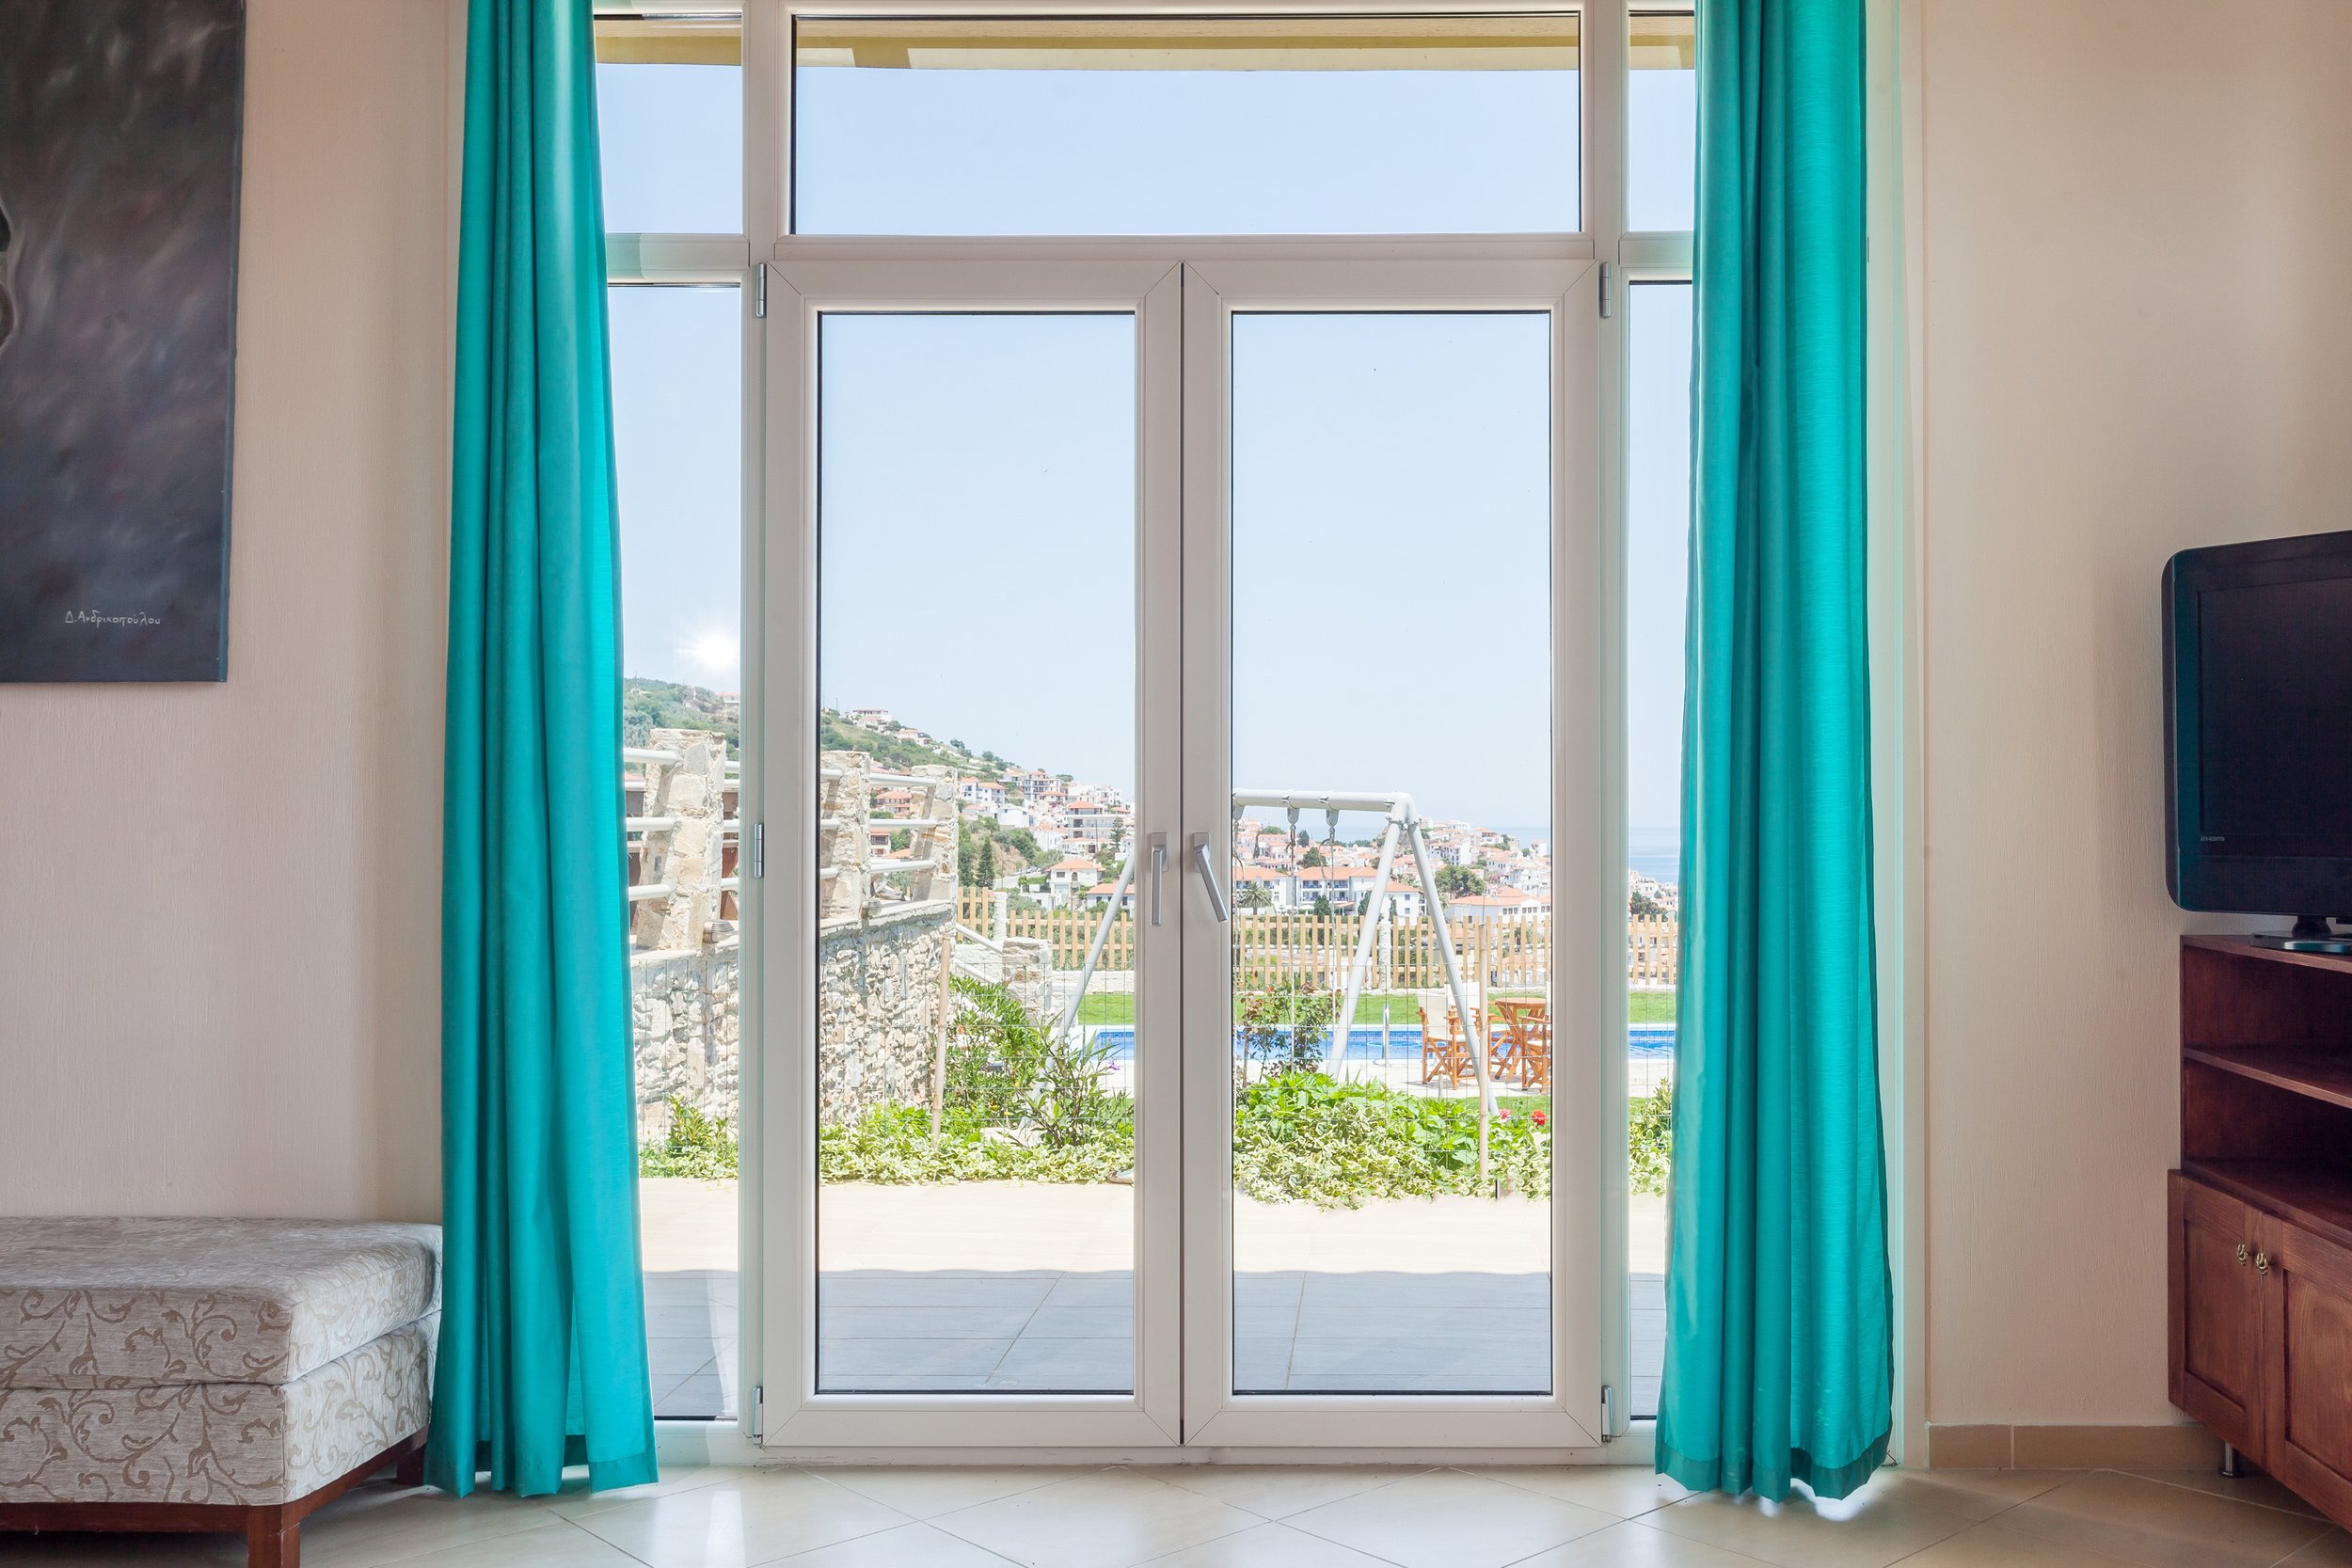 glorious_villa_with_amazing_view_curtains_window.jpg